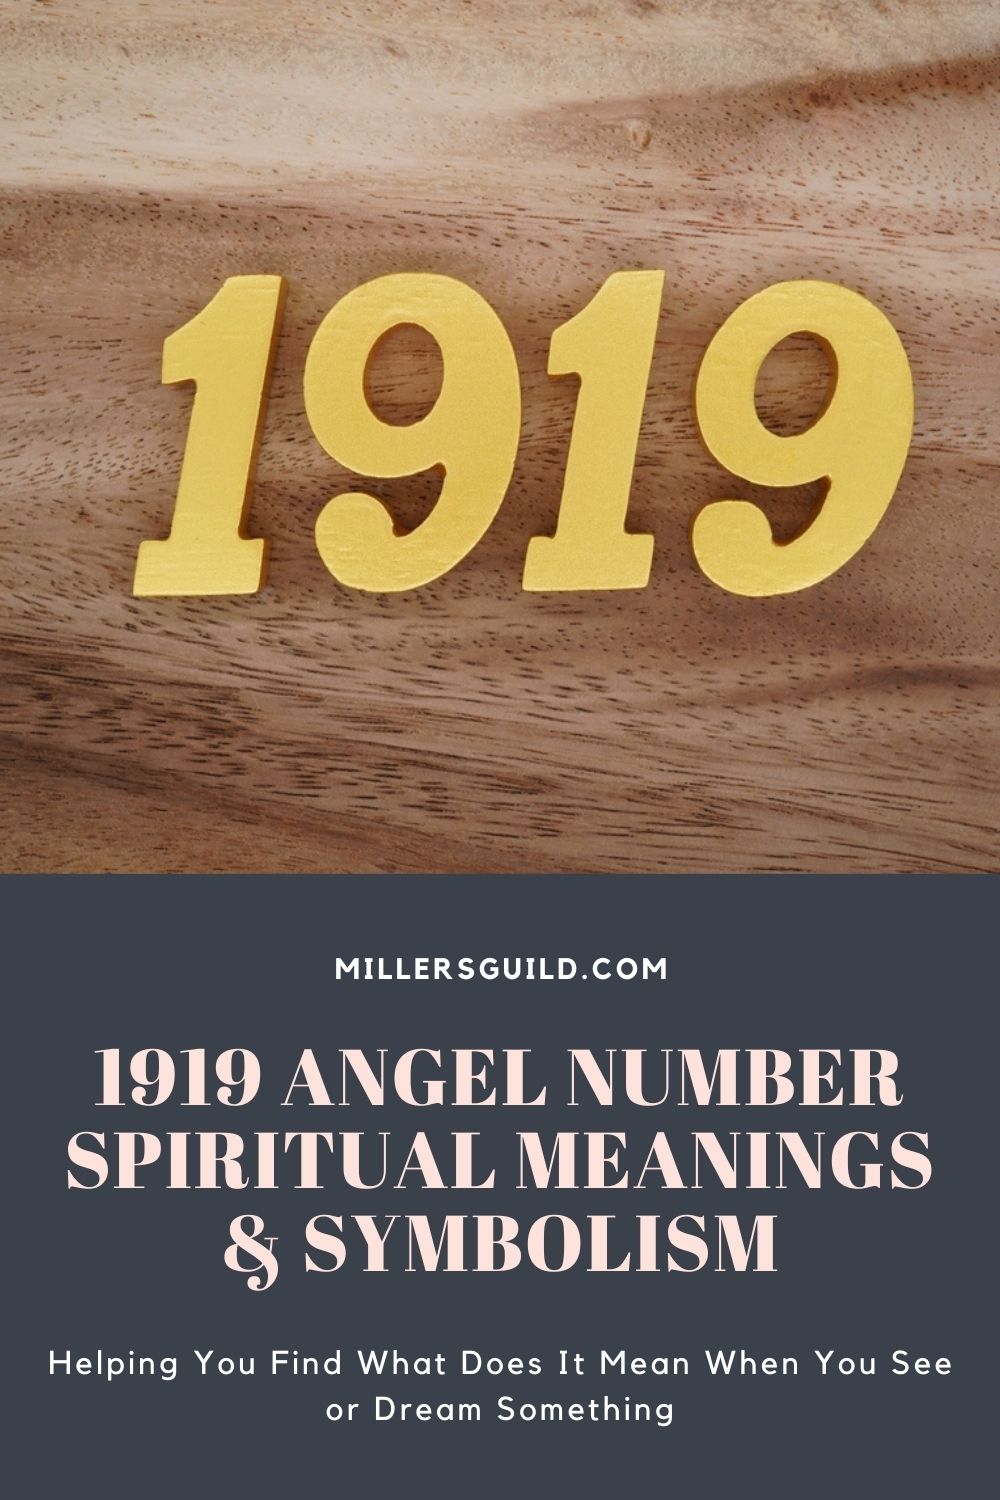 1919 Angel Number Spiritual Meanings & Symbolism 1